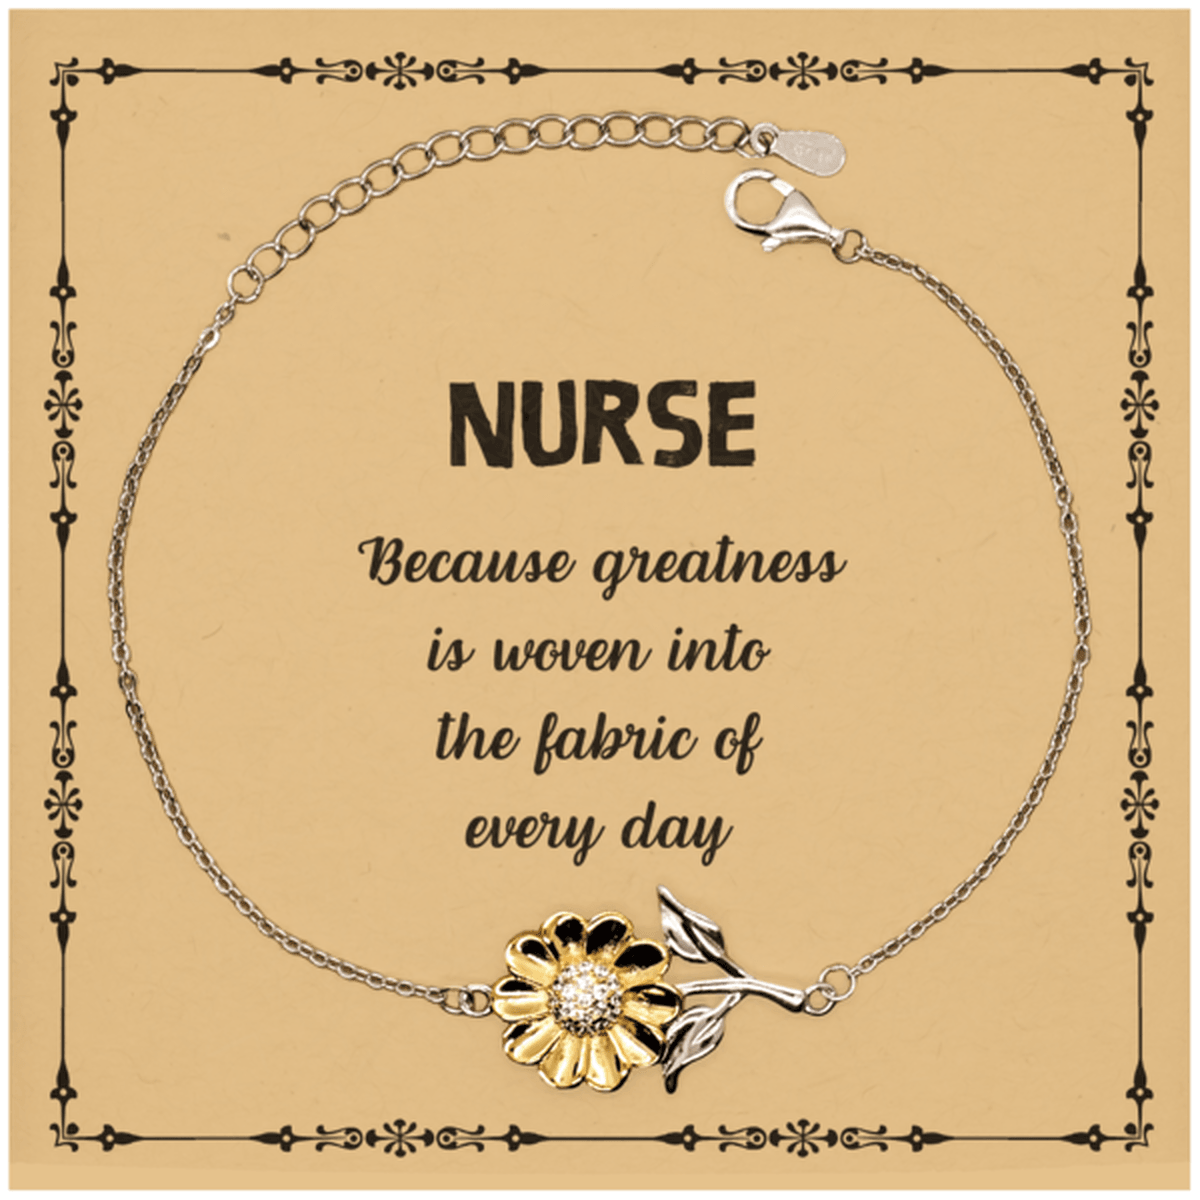 Sarcastic Nurse Sunflower Bracelet Gifts, Christmas Holiday Gifts for Nurse Birthday Message Card, Nurse: Because greatness is woven into the fabric of every day, Coworkers, Friends - Mallard Moon Gift Shop